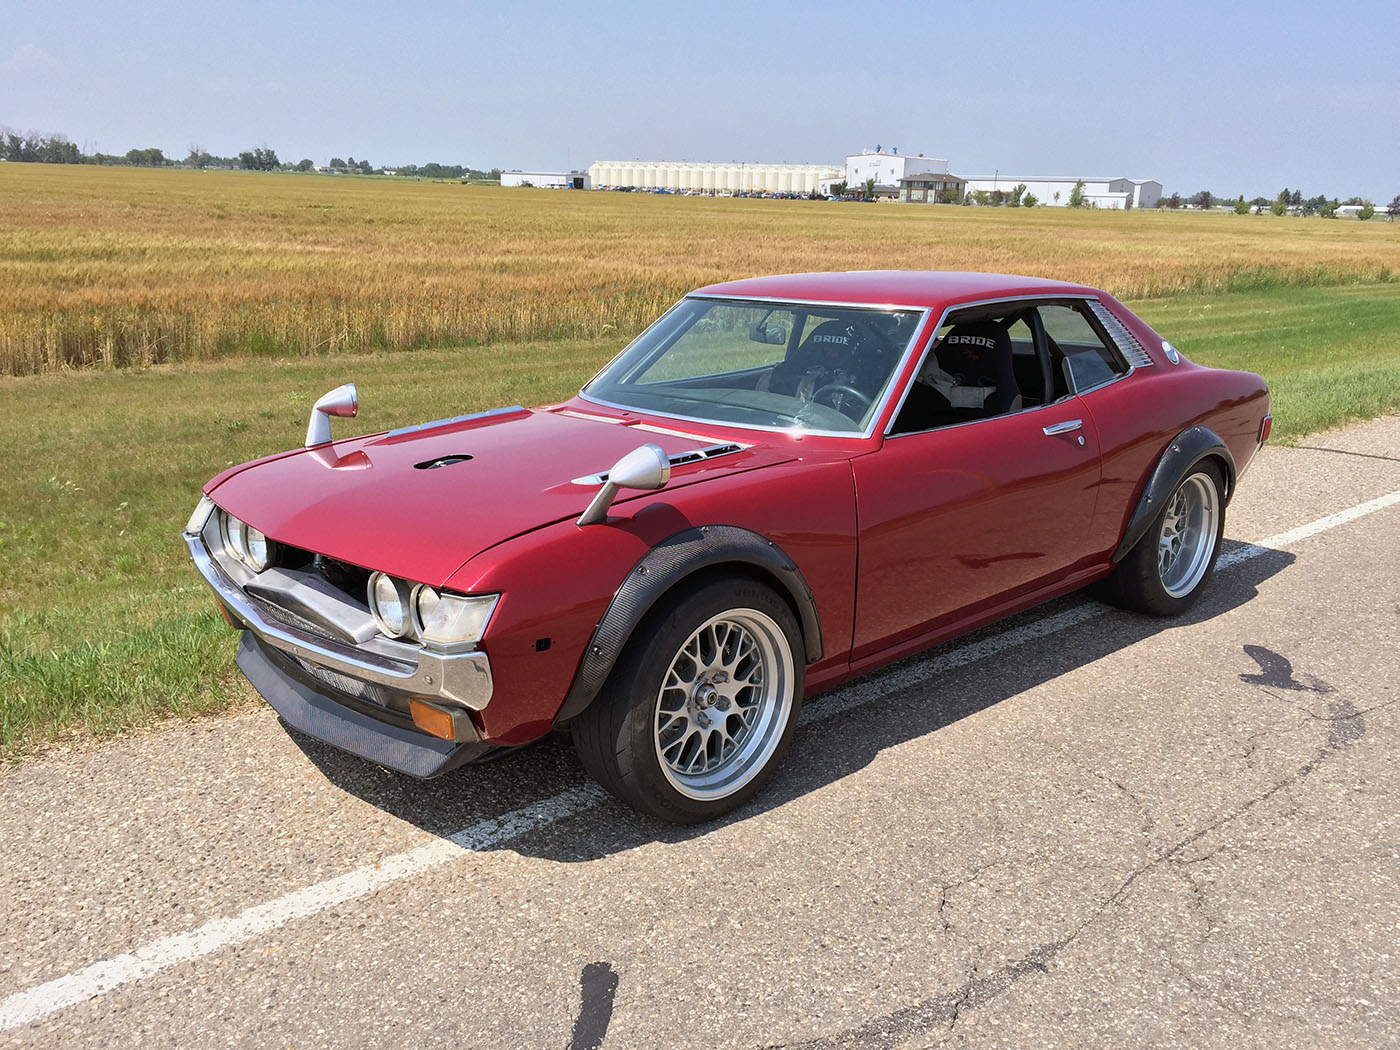 http://www.engineswapdepot.com/wp-content/uploads/2015/09/1973-Toyota-Celica-with-a-Twin-turbo-1UZ-FE-01.jpg